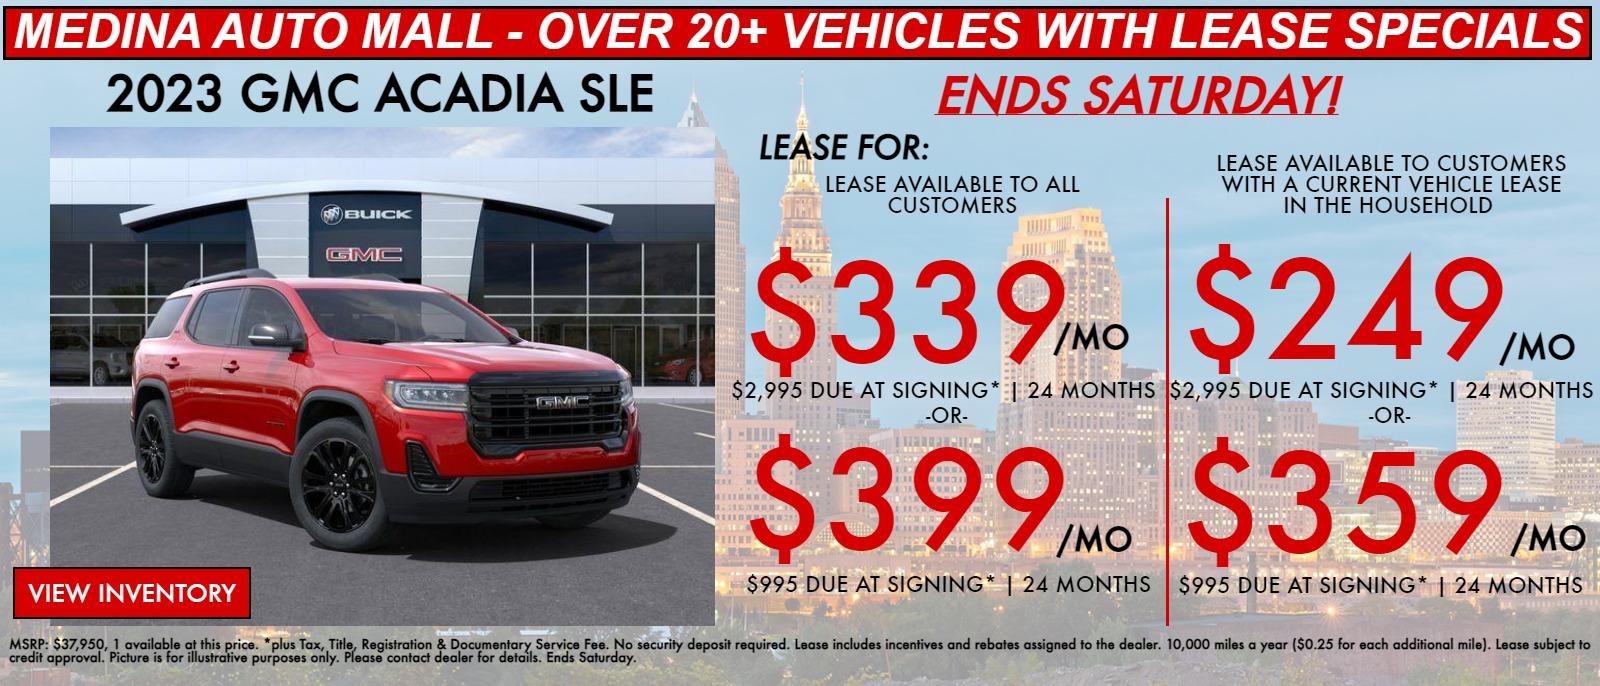 ACADIA lease special deals in Medina, OH